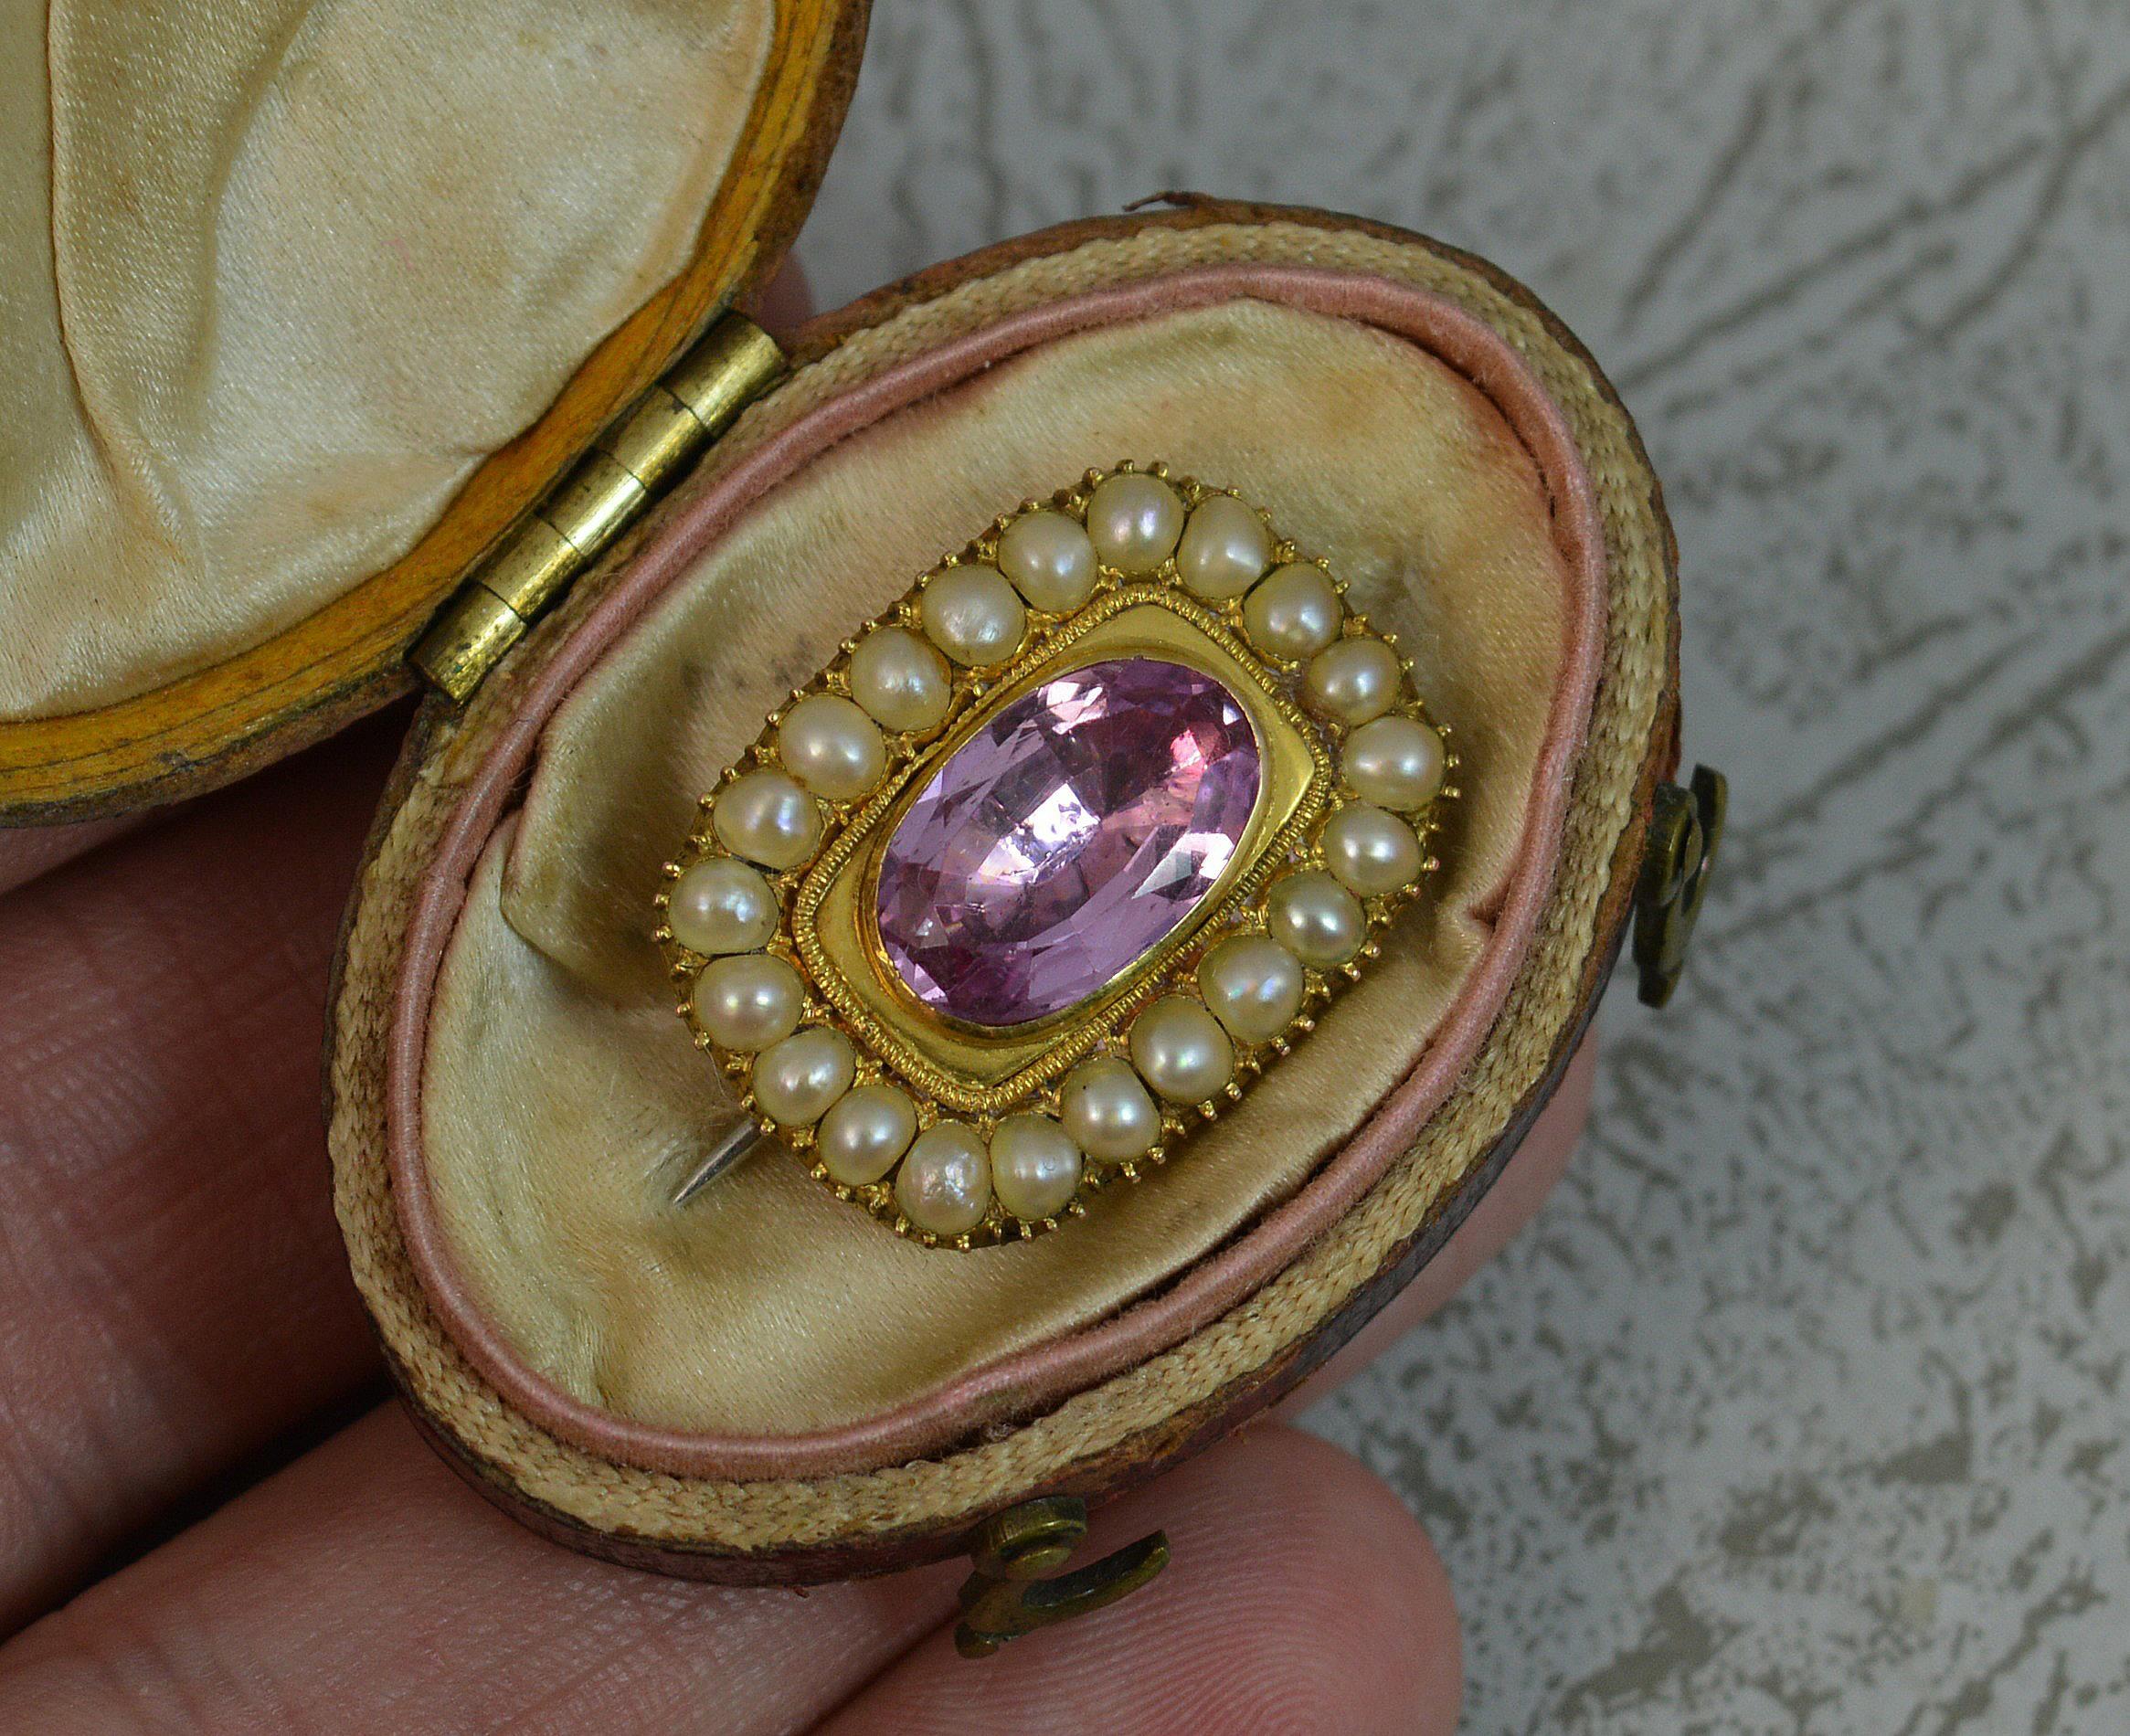 A stunning Georgian period panel brooch.
Solid 15 carat yellow gold example.
Designed with a single oval cut, closed, foiled back pink topaz to the centre. Surrounding are multiple pearls all in a closed setting.
Complete in a rouge coloured oval